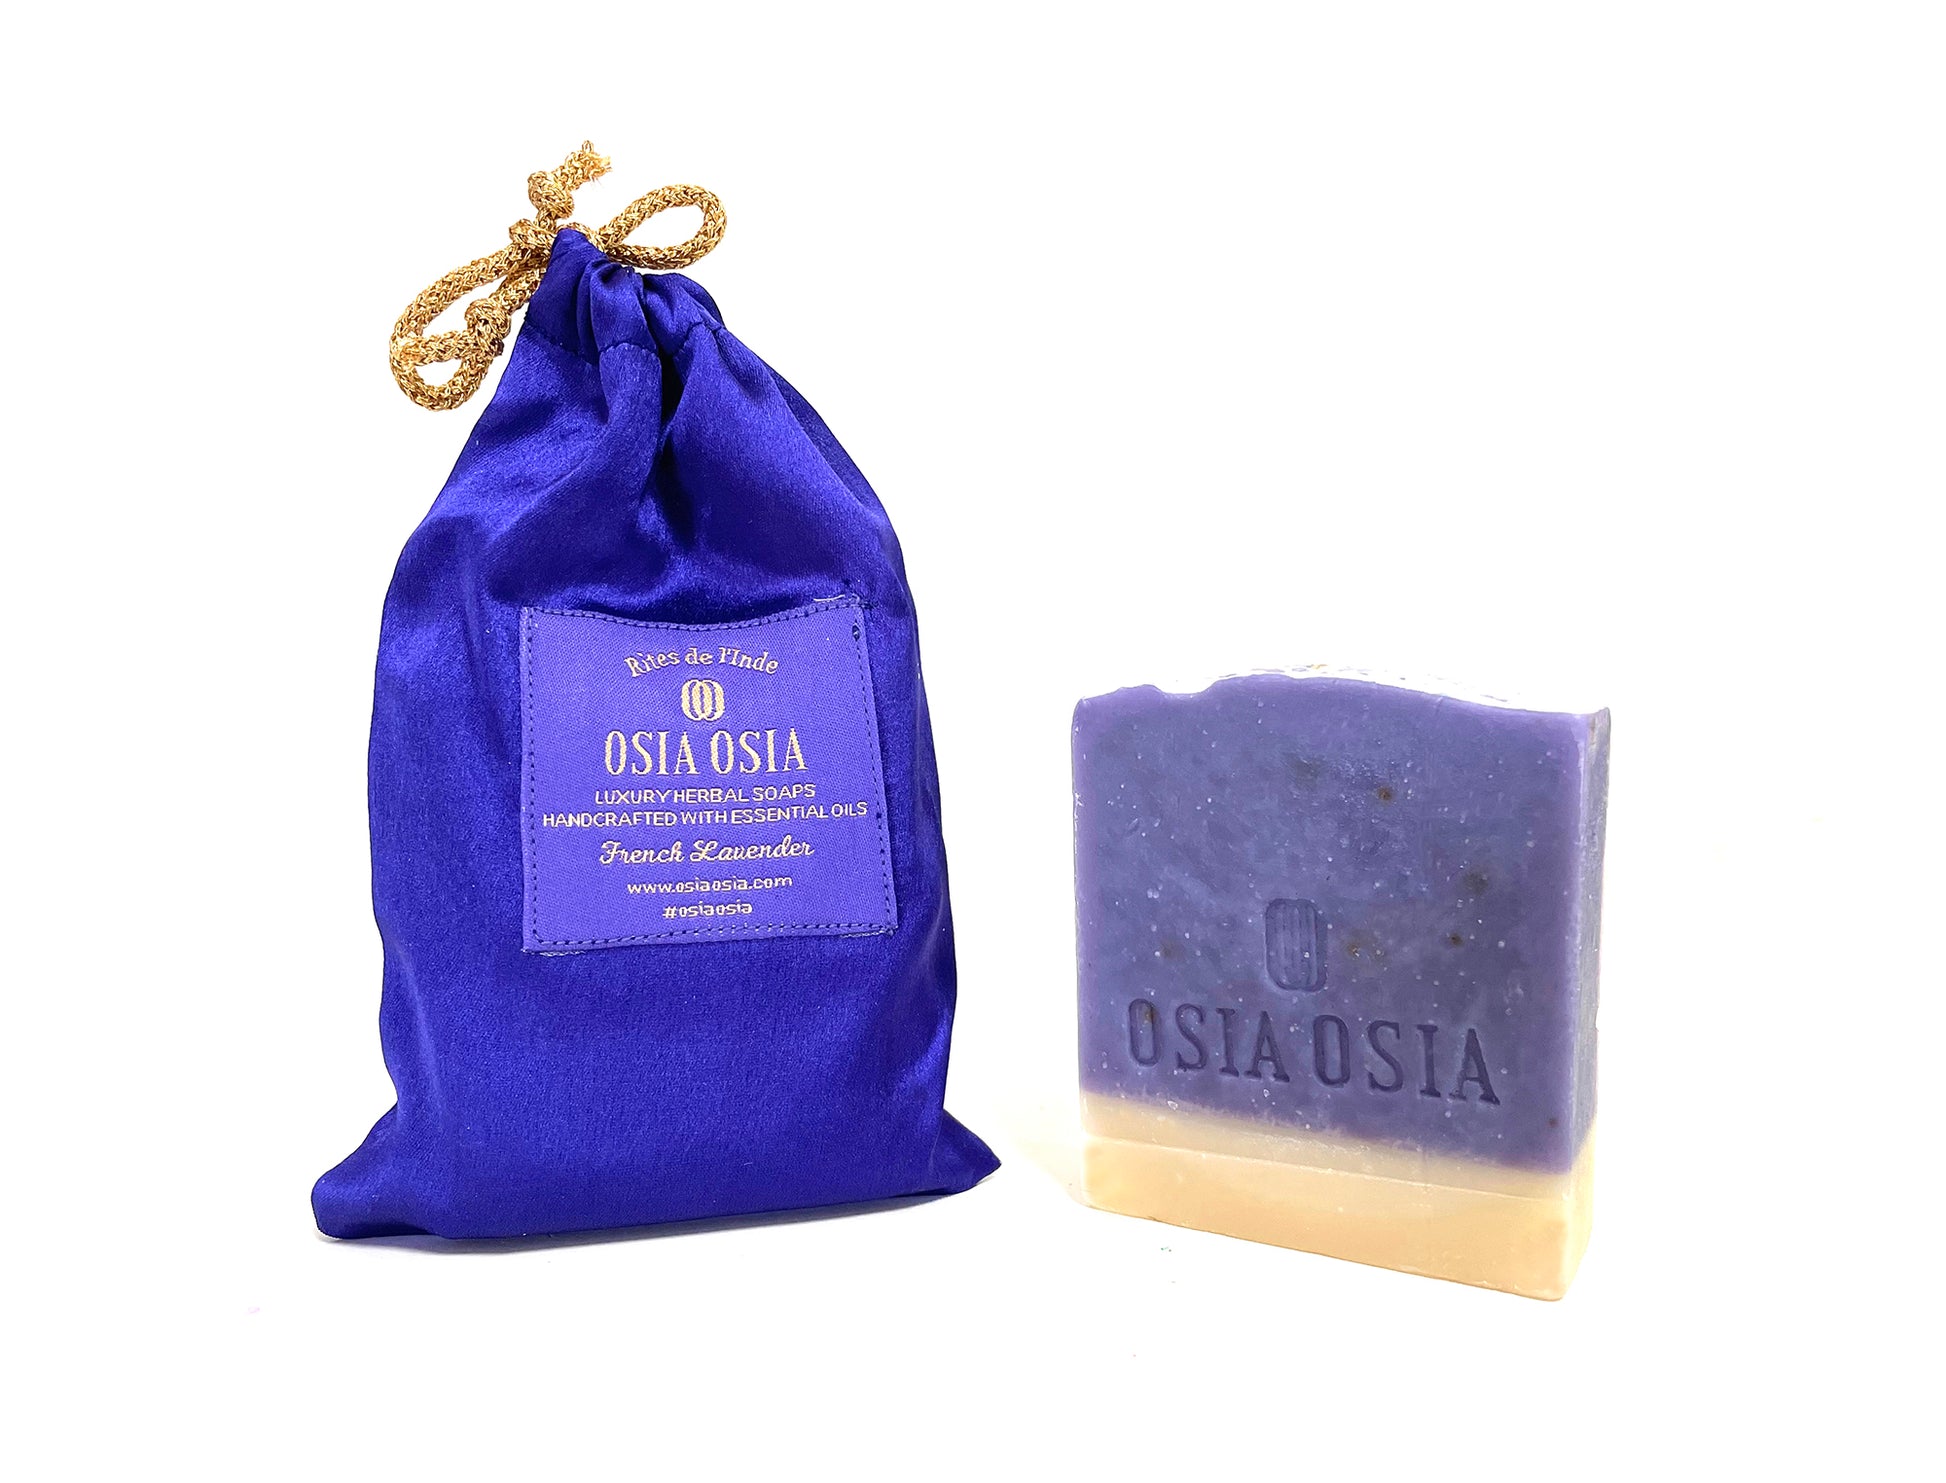 Cold Process French Lavender Handcrafted Luxury Herbal Soap (Body Wash & Face Wash) 冷製法國薰衣草精油芳療皂 (沐浴＋潔面兩用）